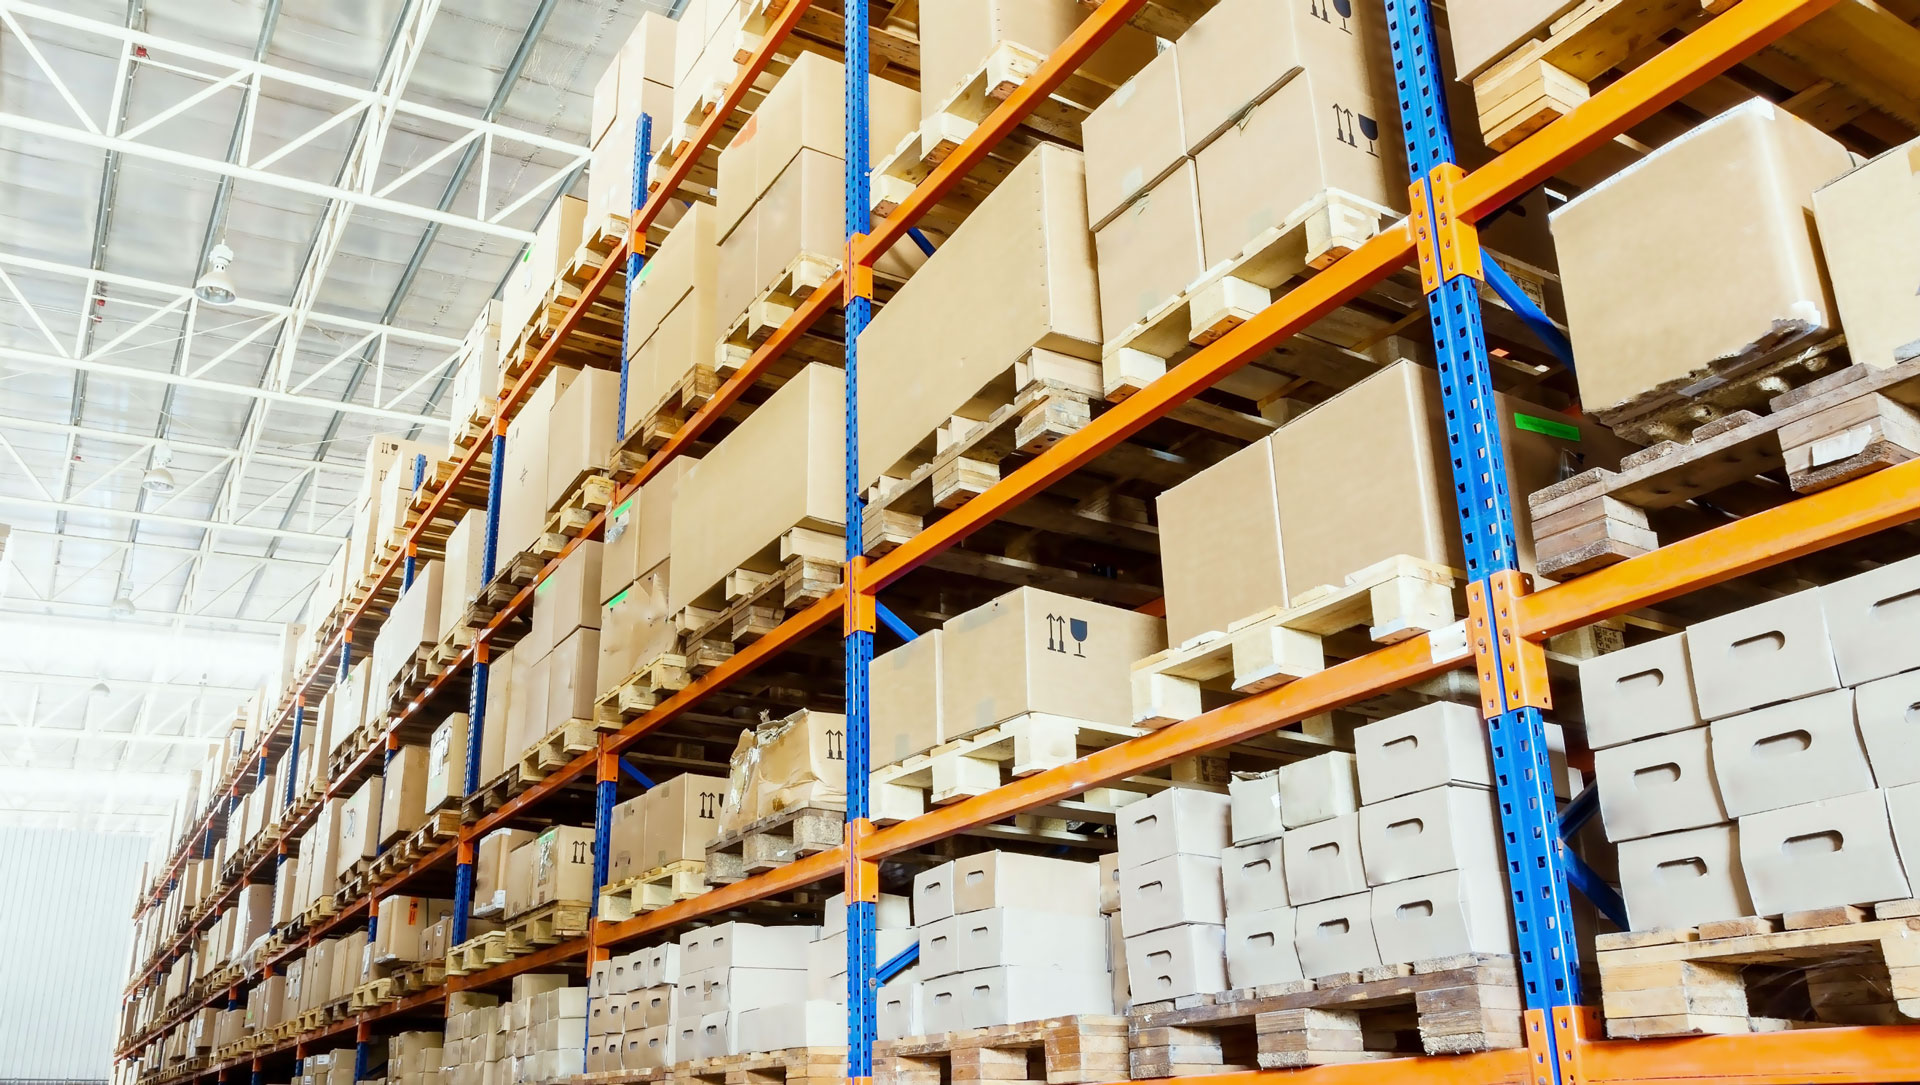 4 things to consider when starting your own warehouse business